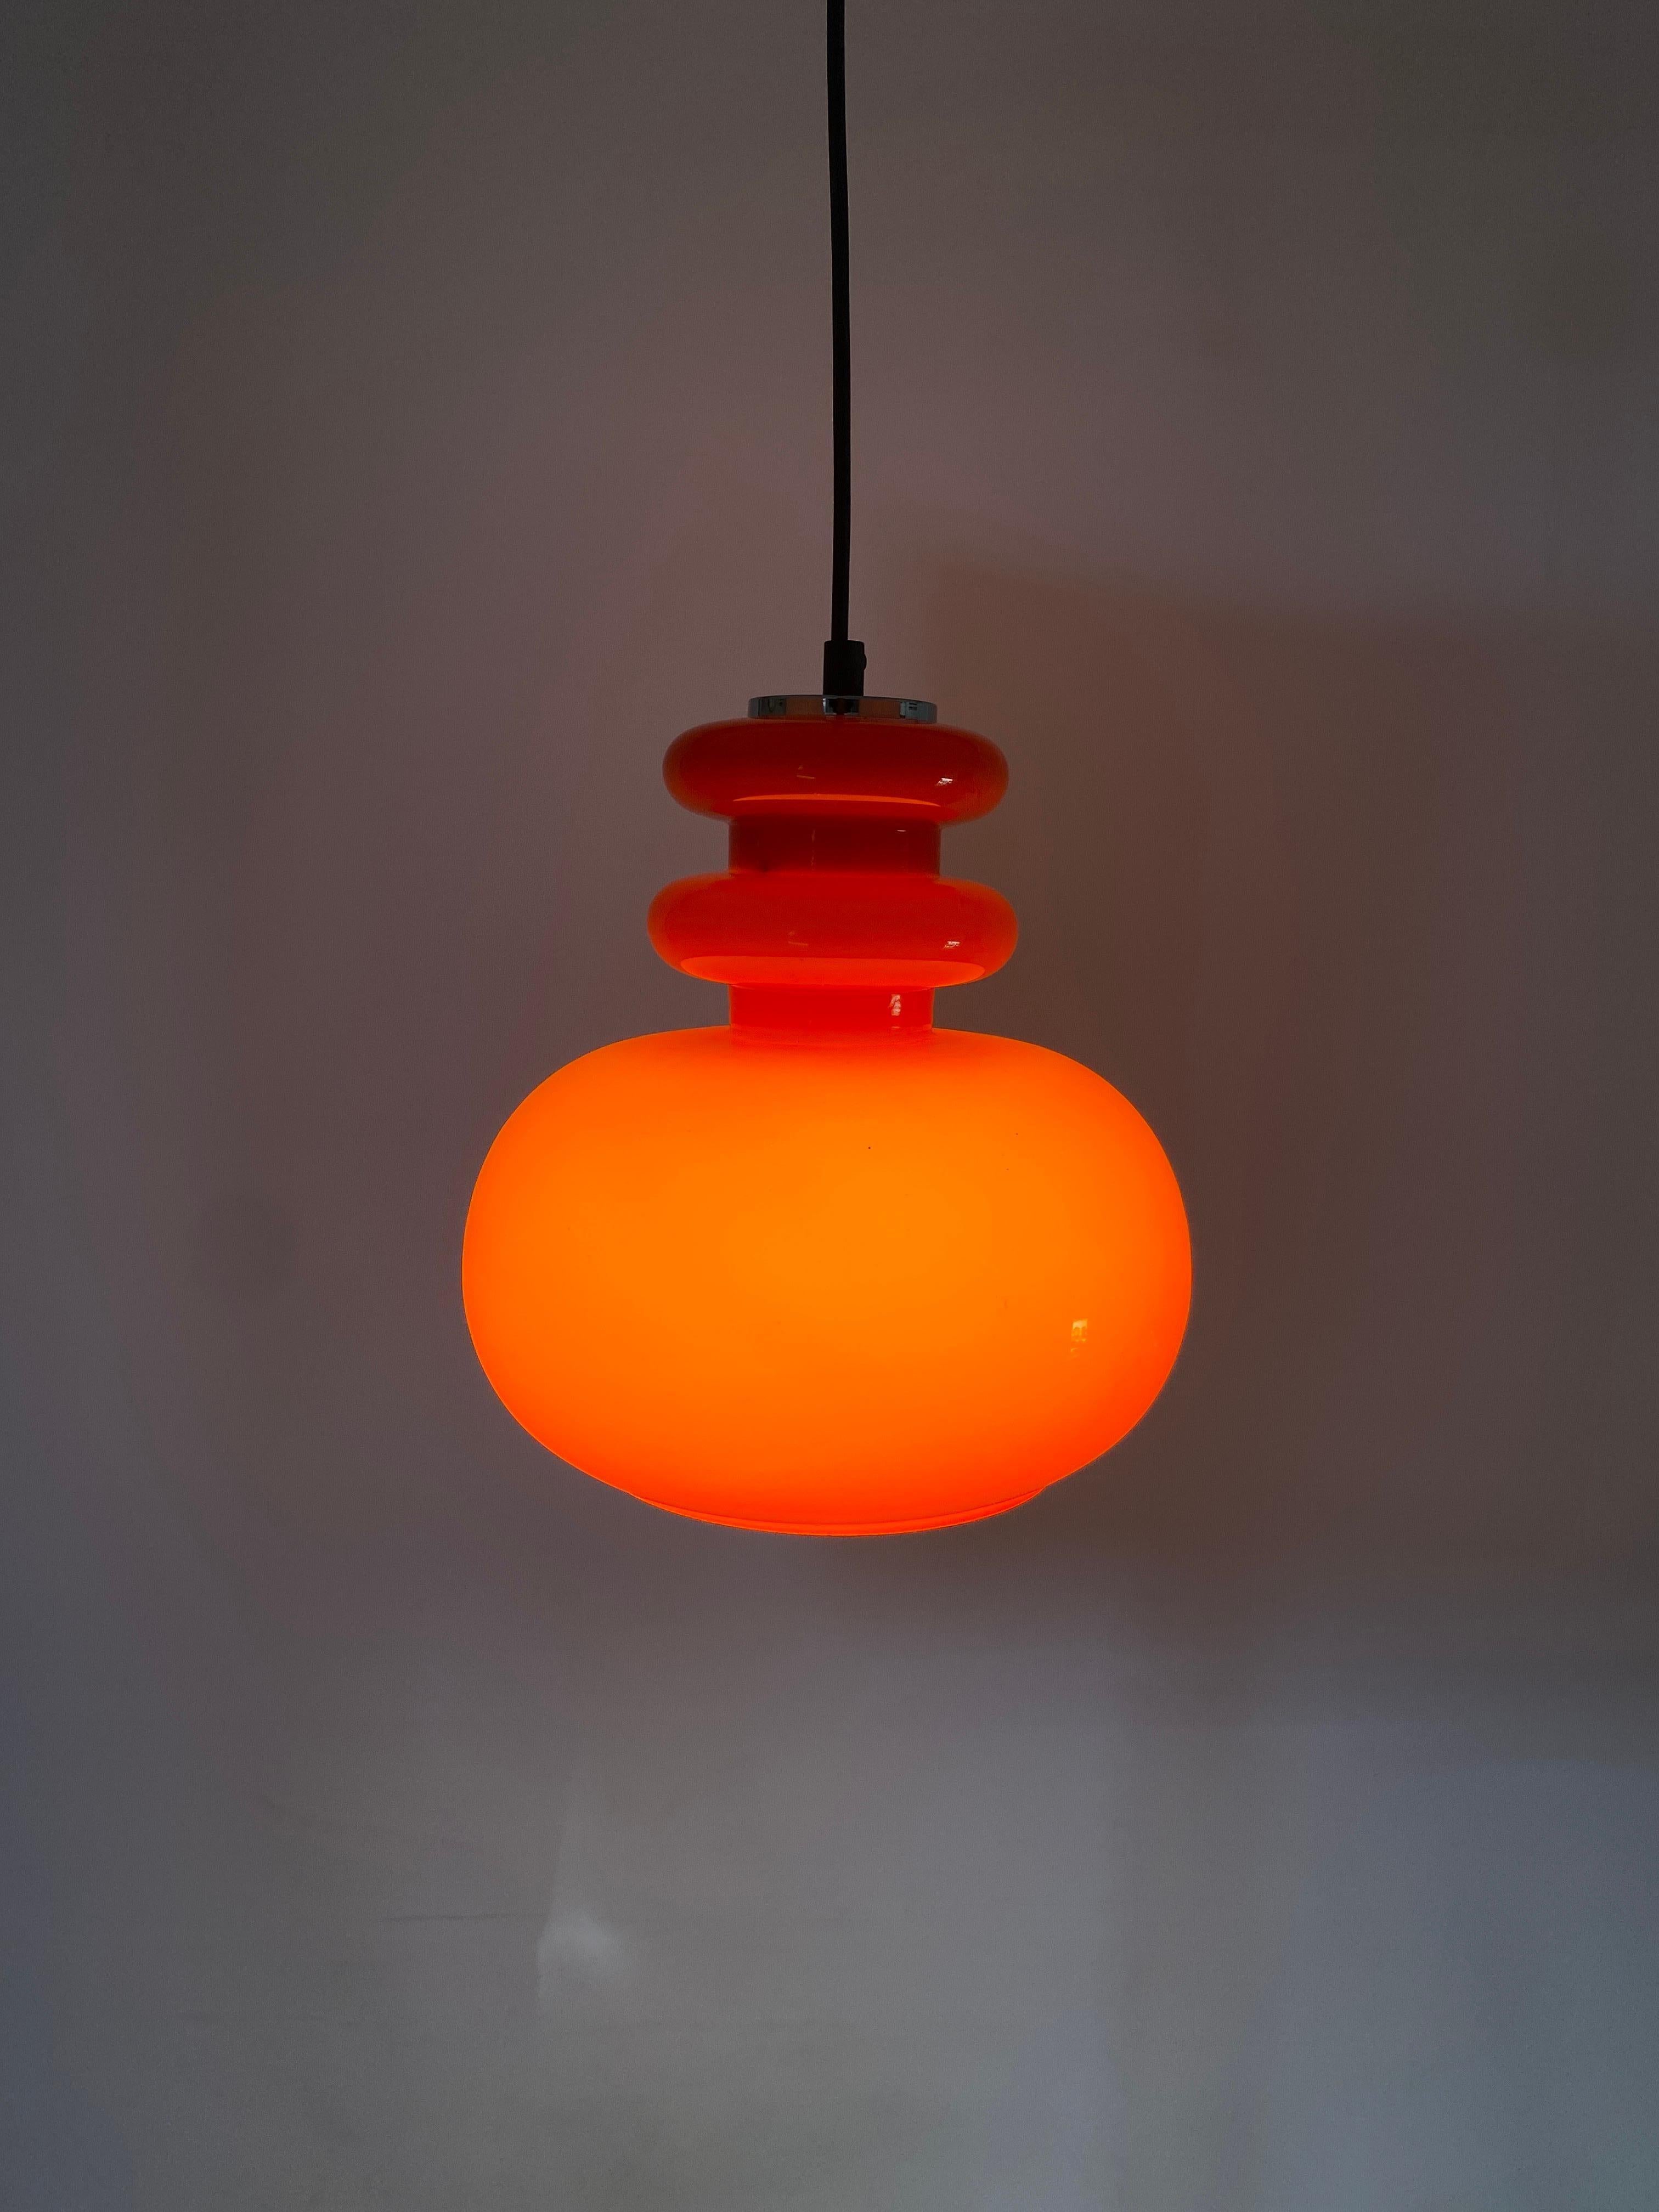 Beautiful German design by Peill and Putzler, produced around 1960. Has a nice light red color and gives a very warm light. 

Typical design of the German makers, also resembles the Swedish designs. More colored  glass pendant lights in